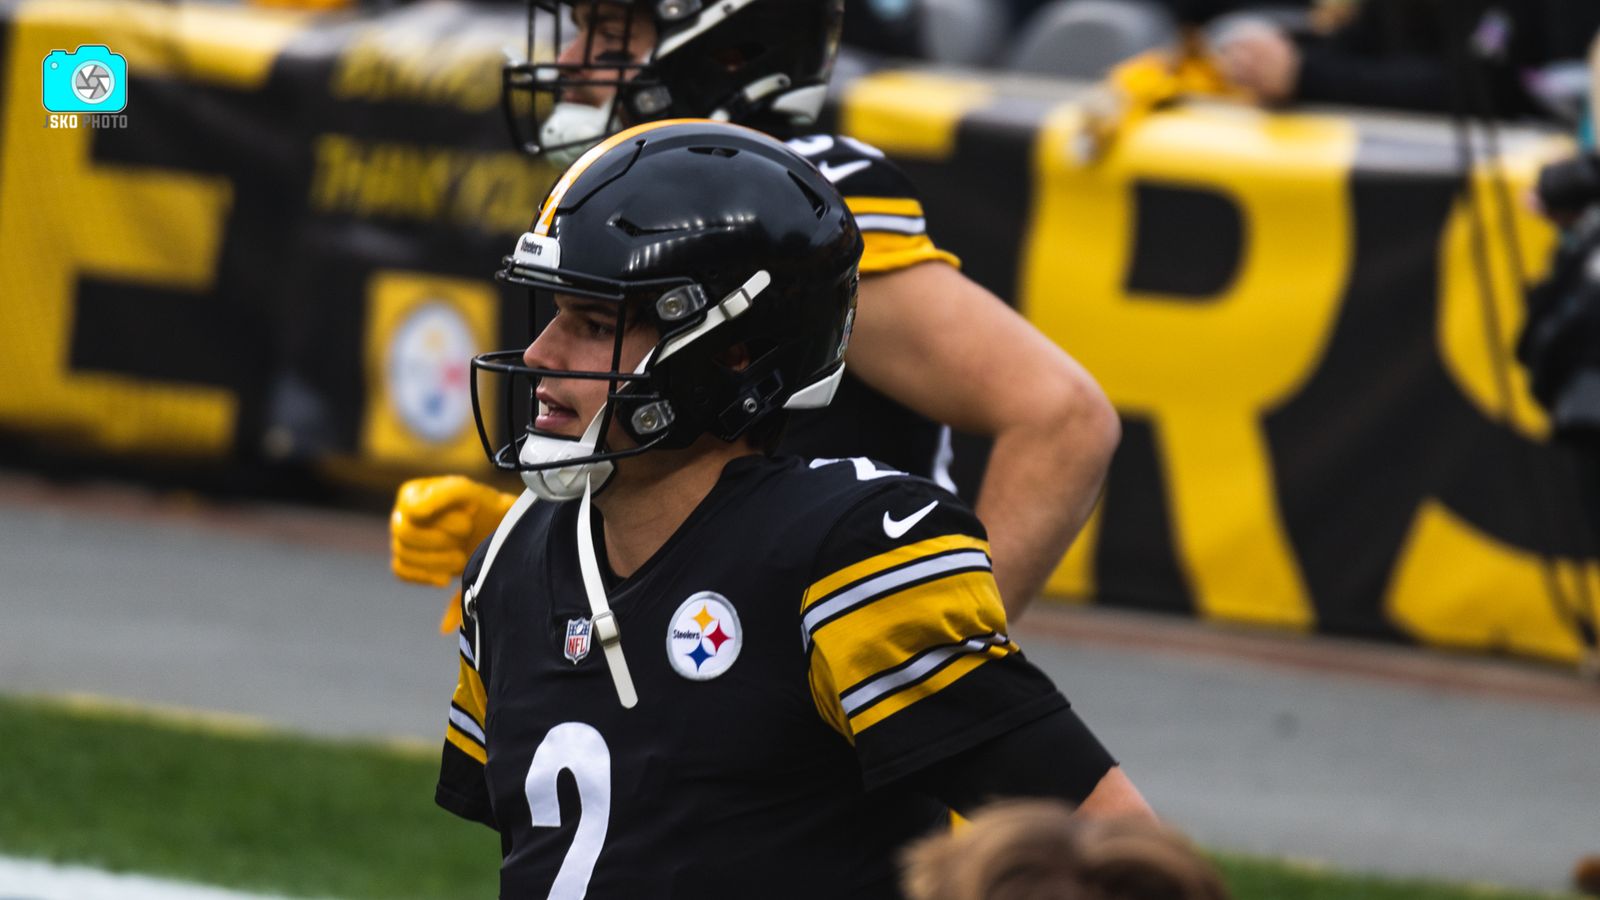 Who will be the Steelers' QB1 in 2022?